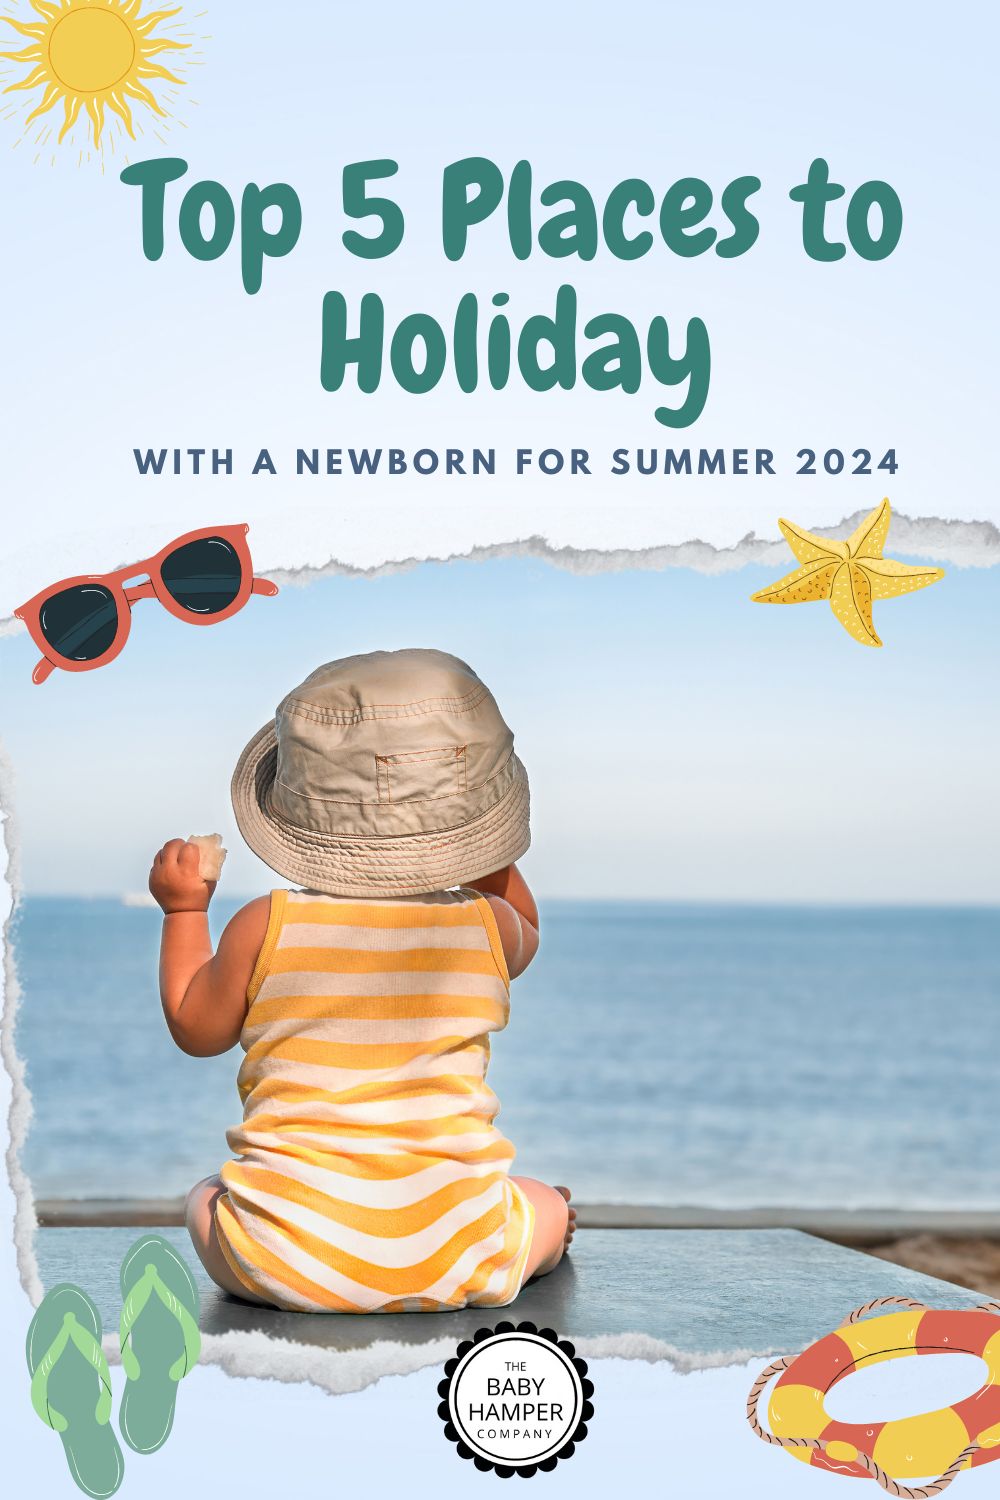 Top 5 Places to Holiday with a Newborn for Summer 2024